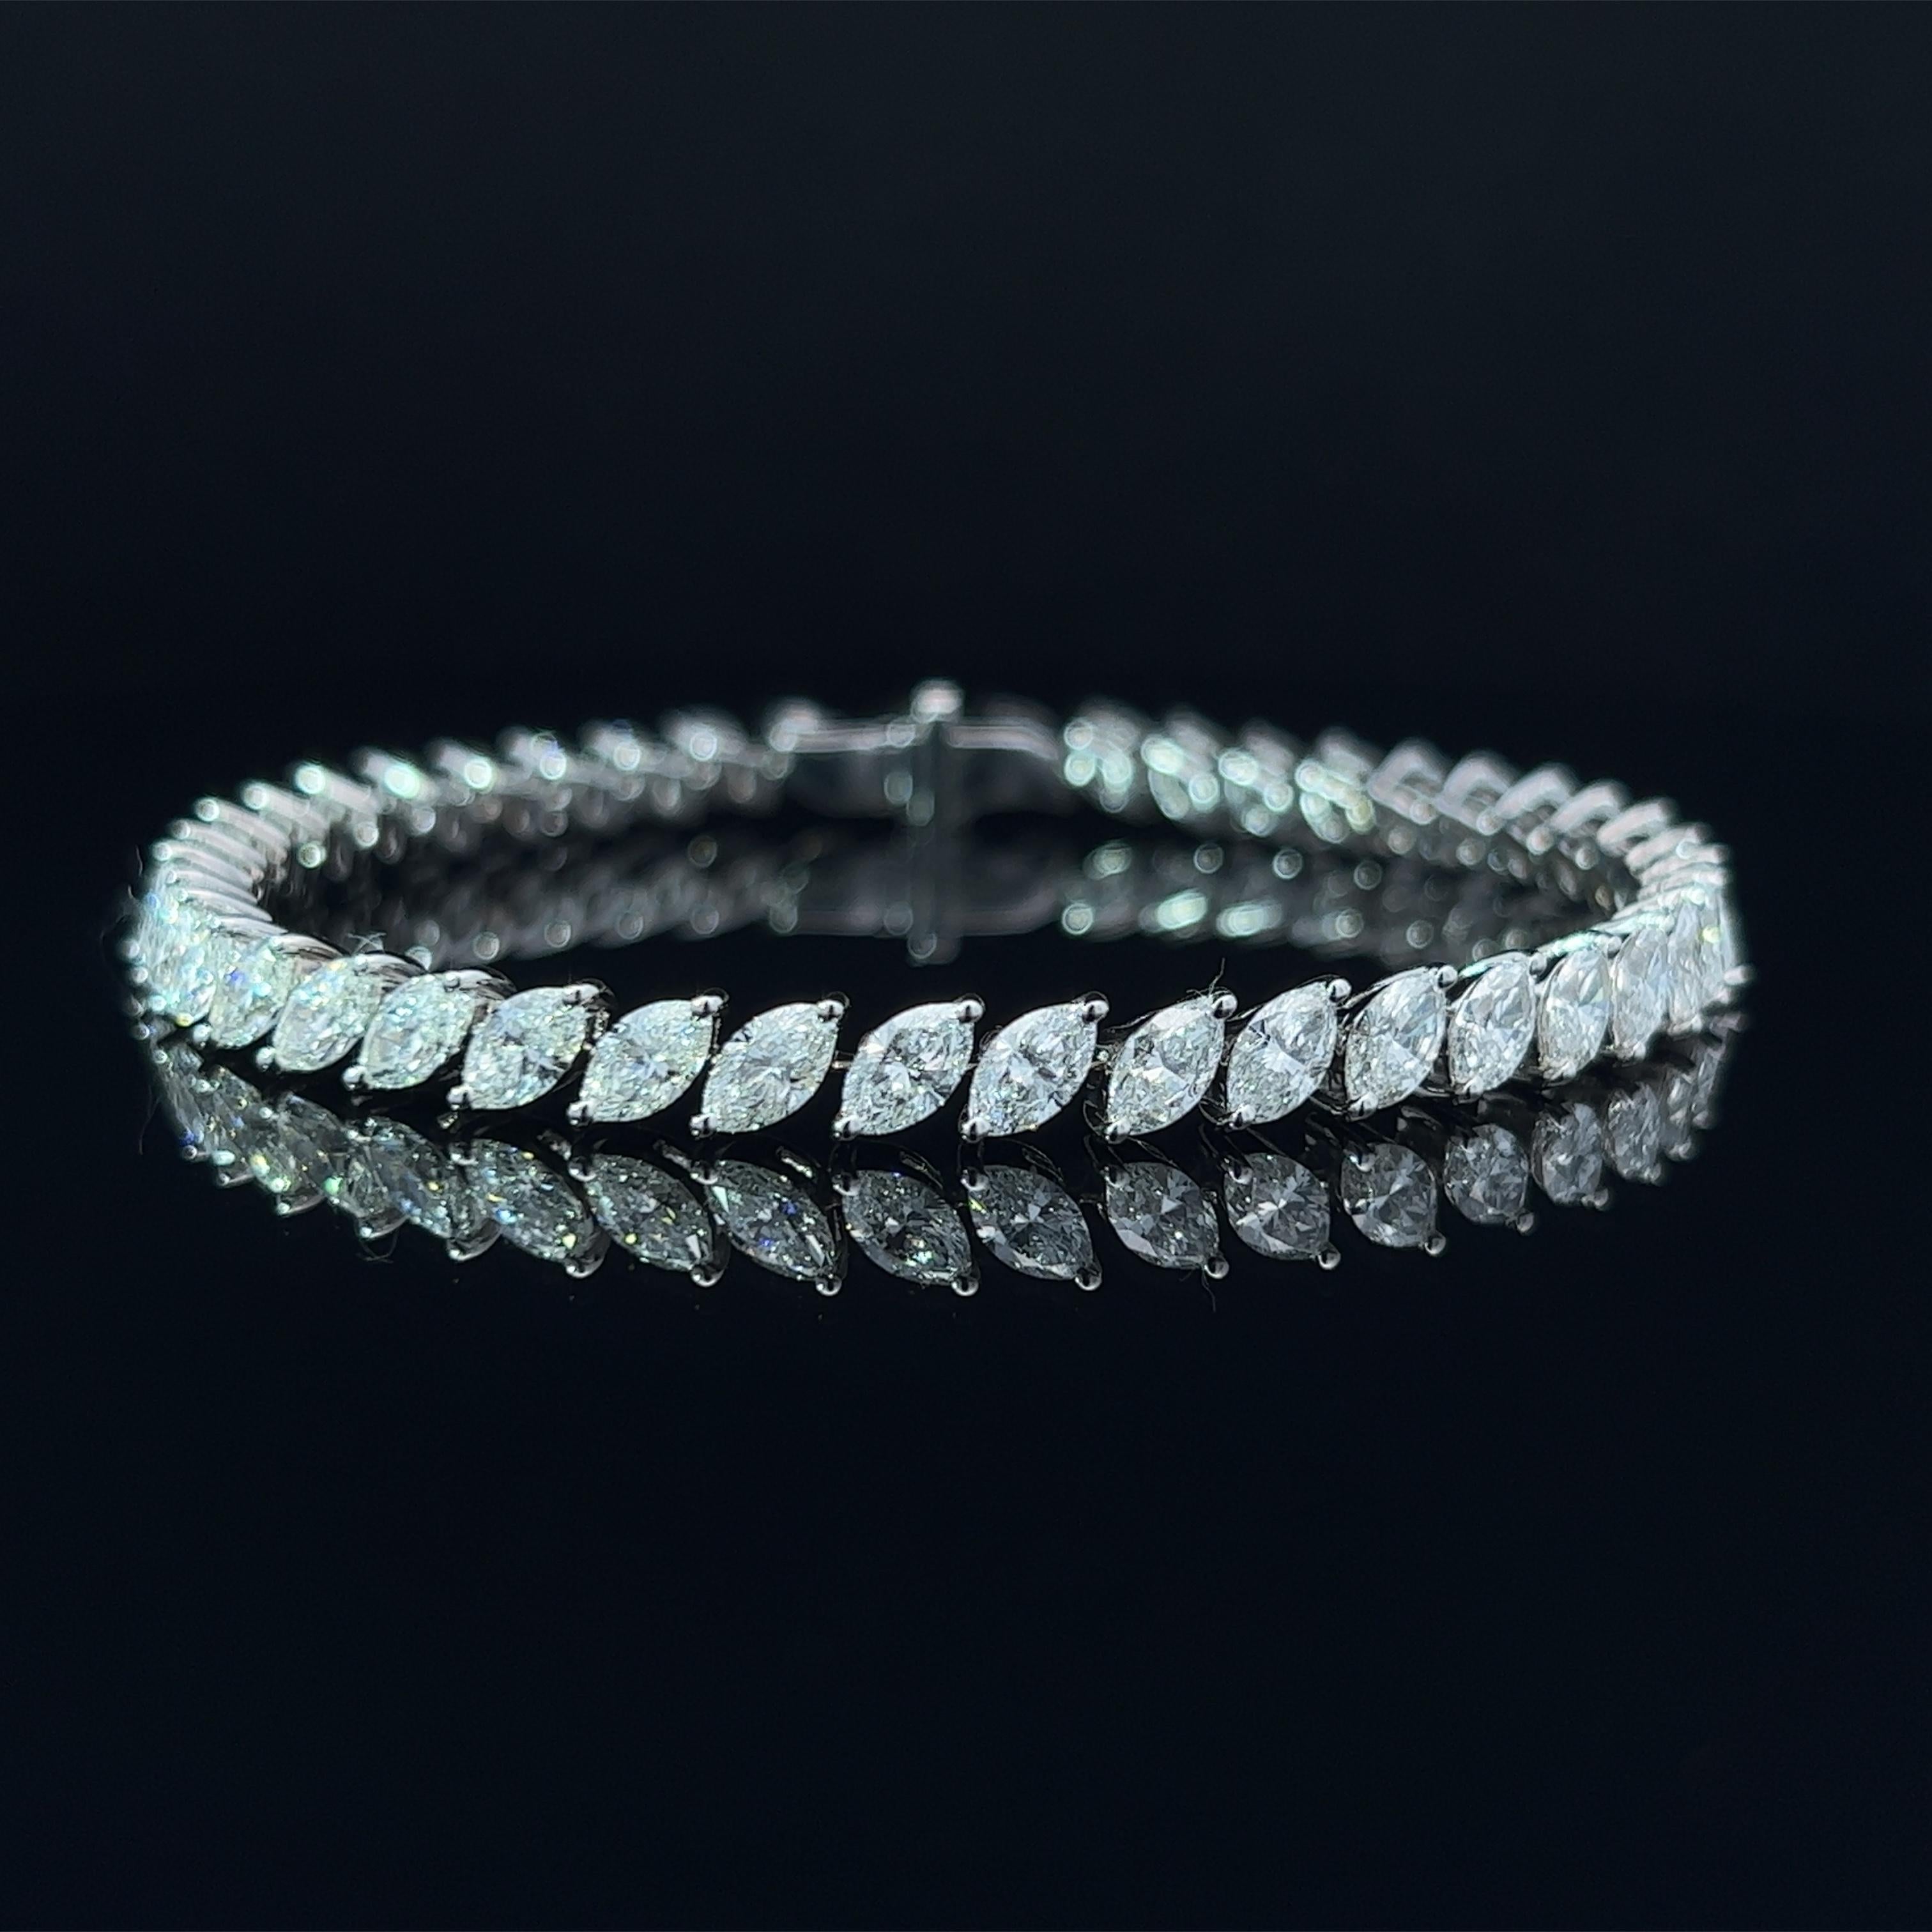 Diamond Shape: Marquise Cut 
Total Diamond Weight: 10.2ct
Individual Diamond Weight: .25ct
Color/Clarity: FG VVS  
Metal: 18K White Gold  
Metal Weight: 14.6g 

Key Features:

Marquise-Cut Diamonds: The centerpiece of this bracelet features a